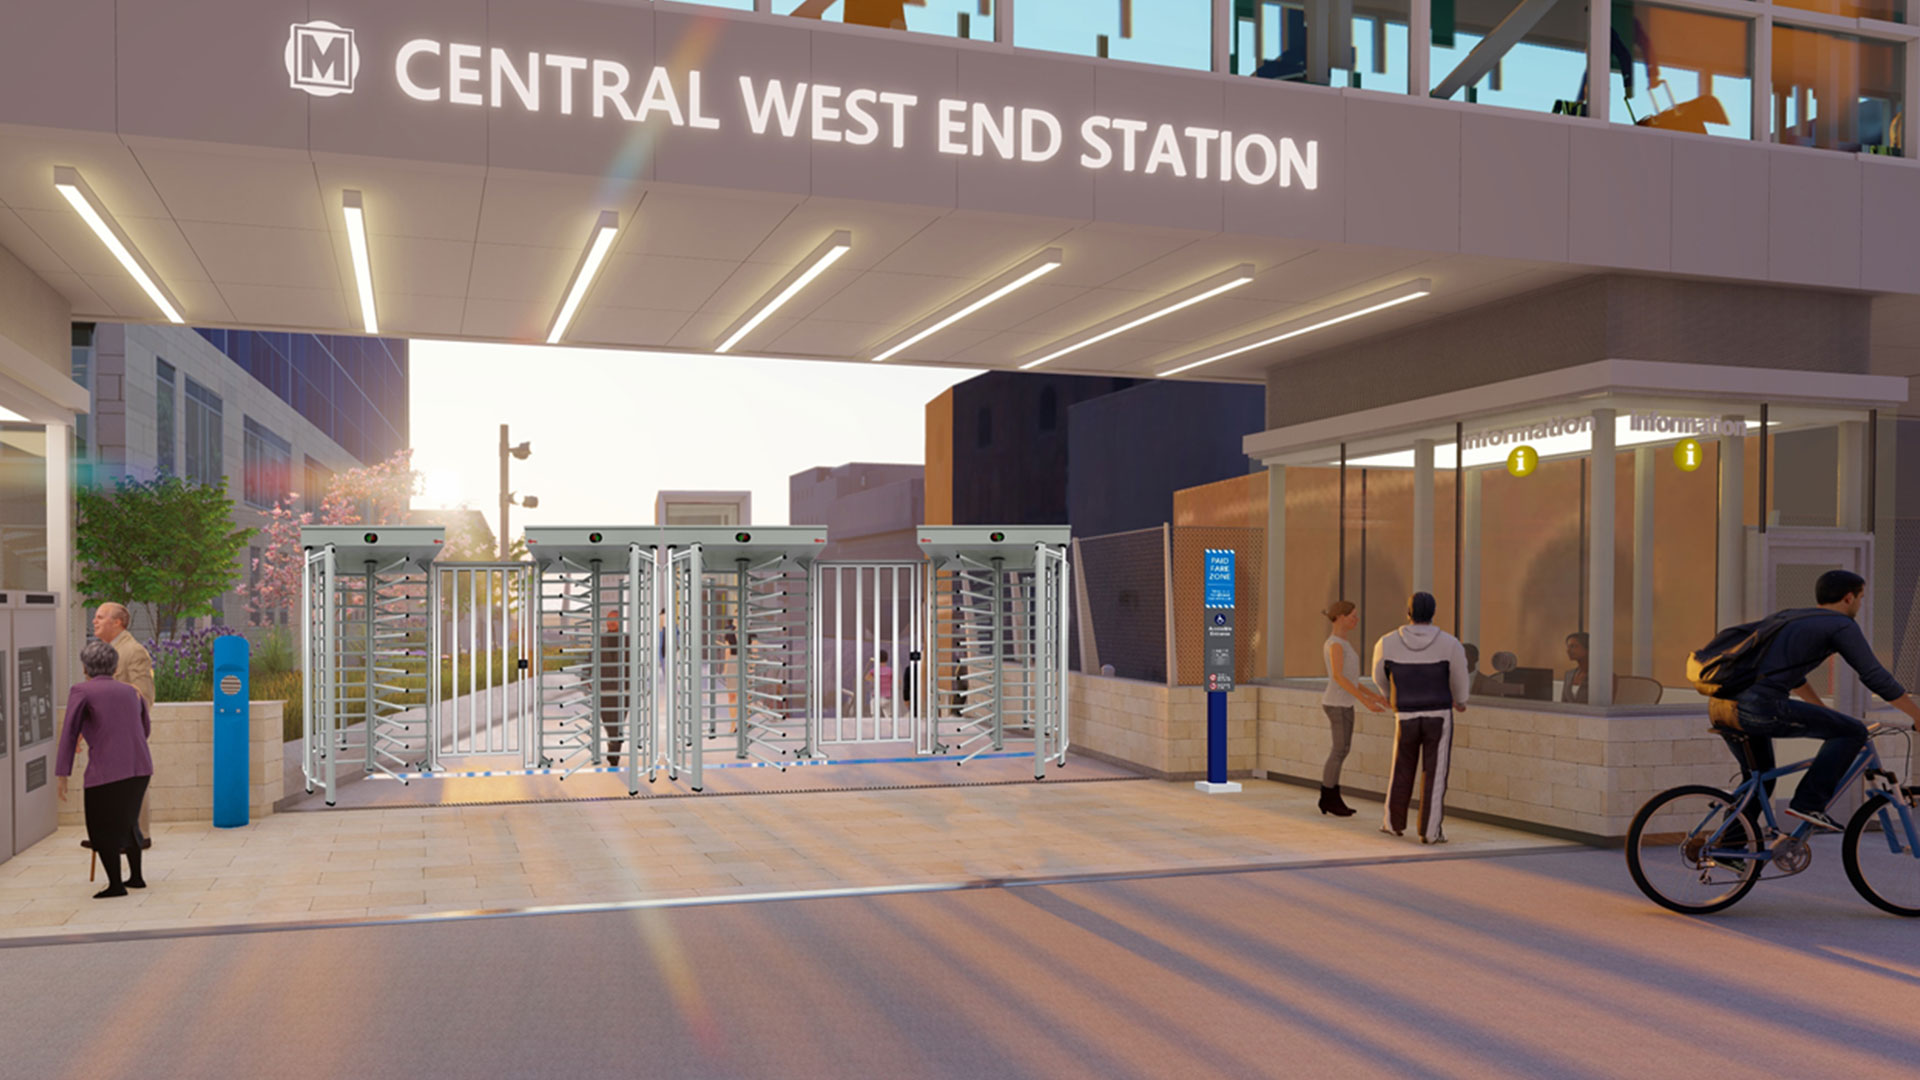 A rendering for the Central West End station.